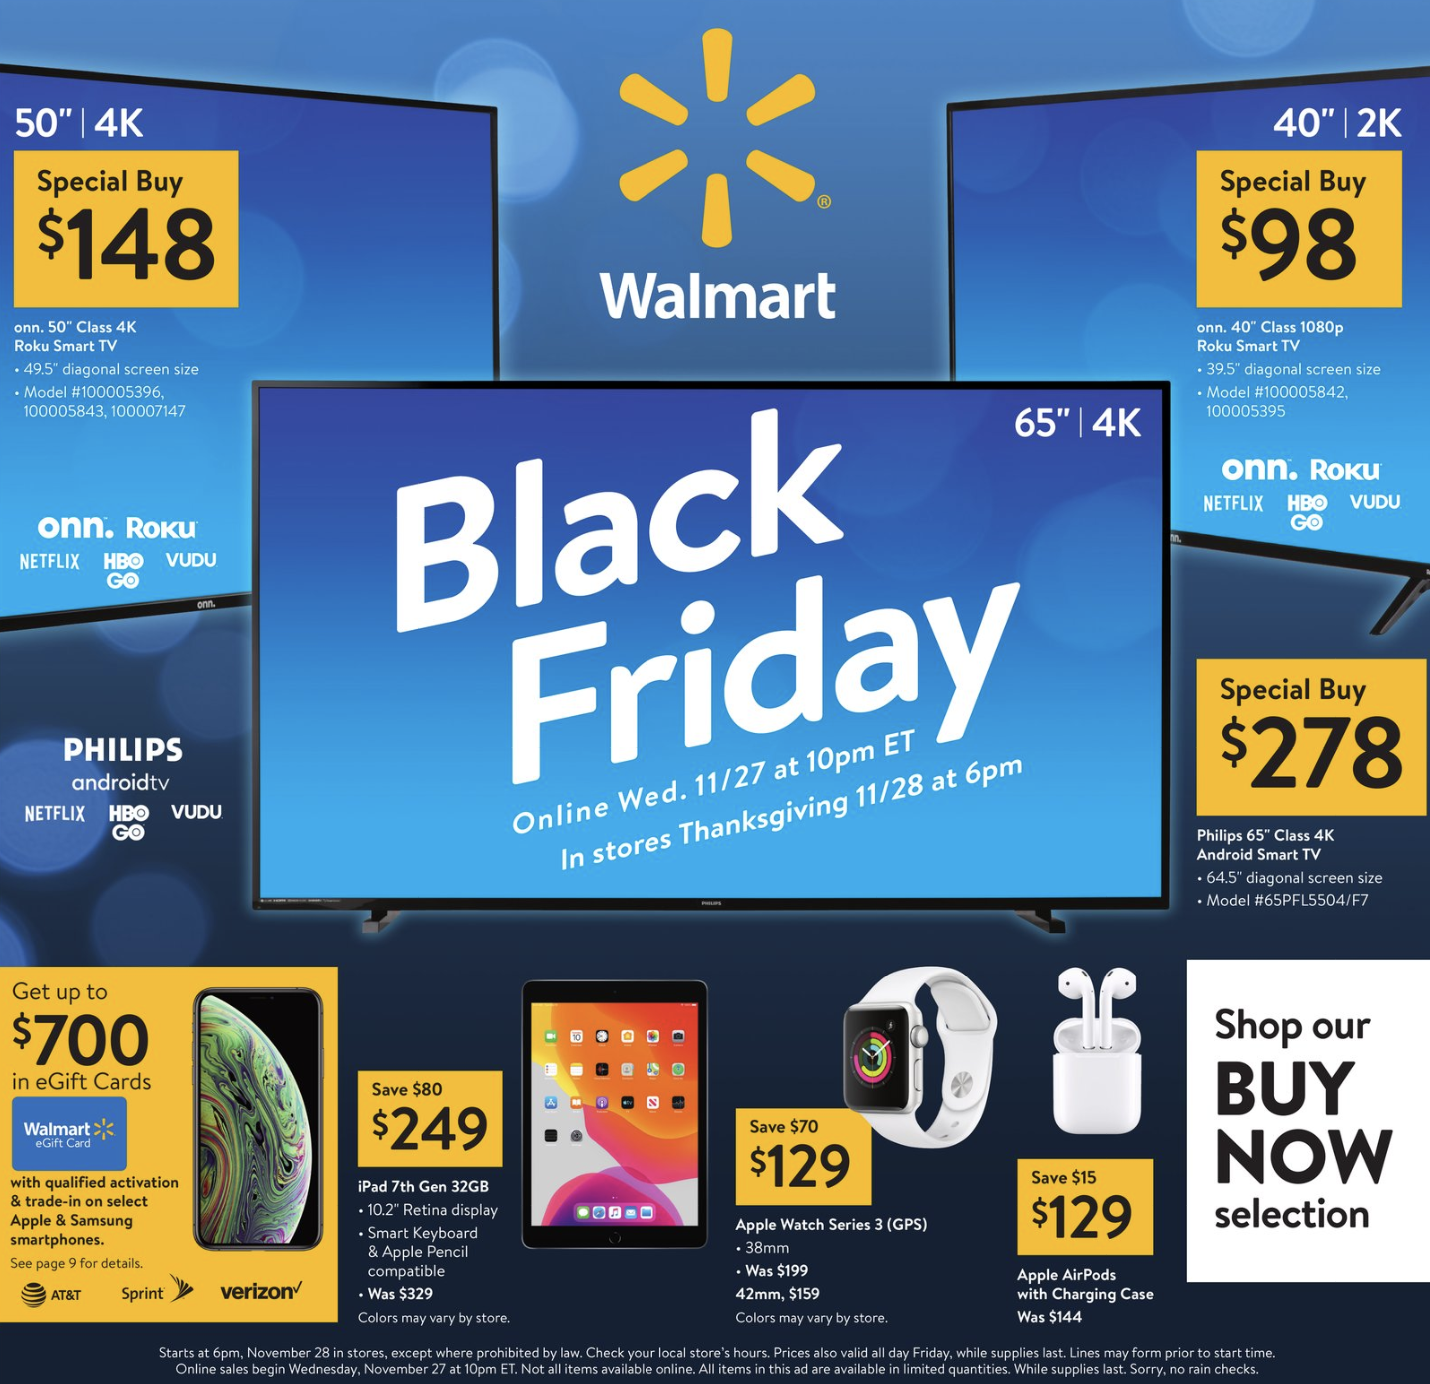 Walmart Black Friday Ad Reveals Notable Ipad Deals, More - 9To5Toys